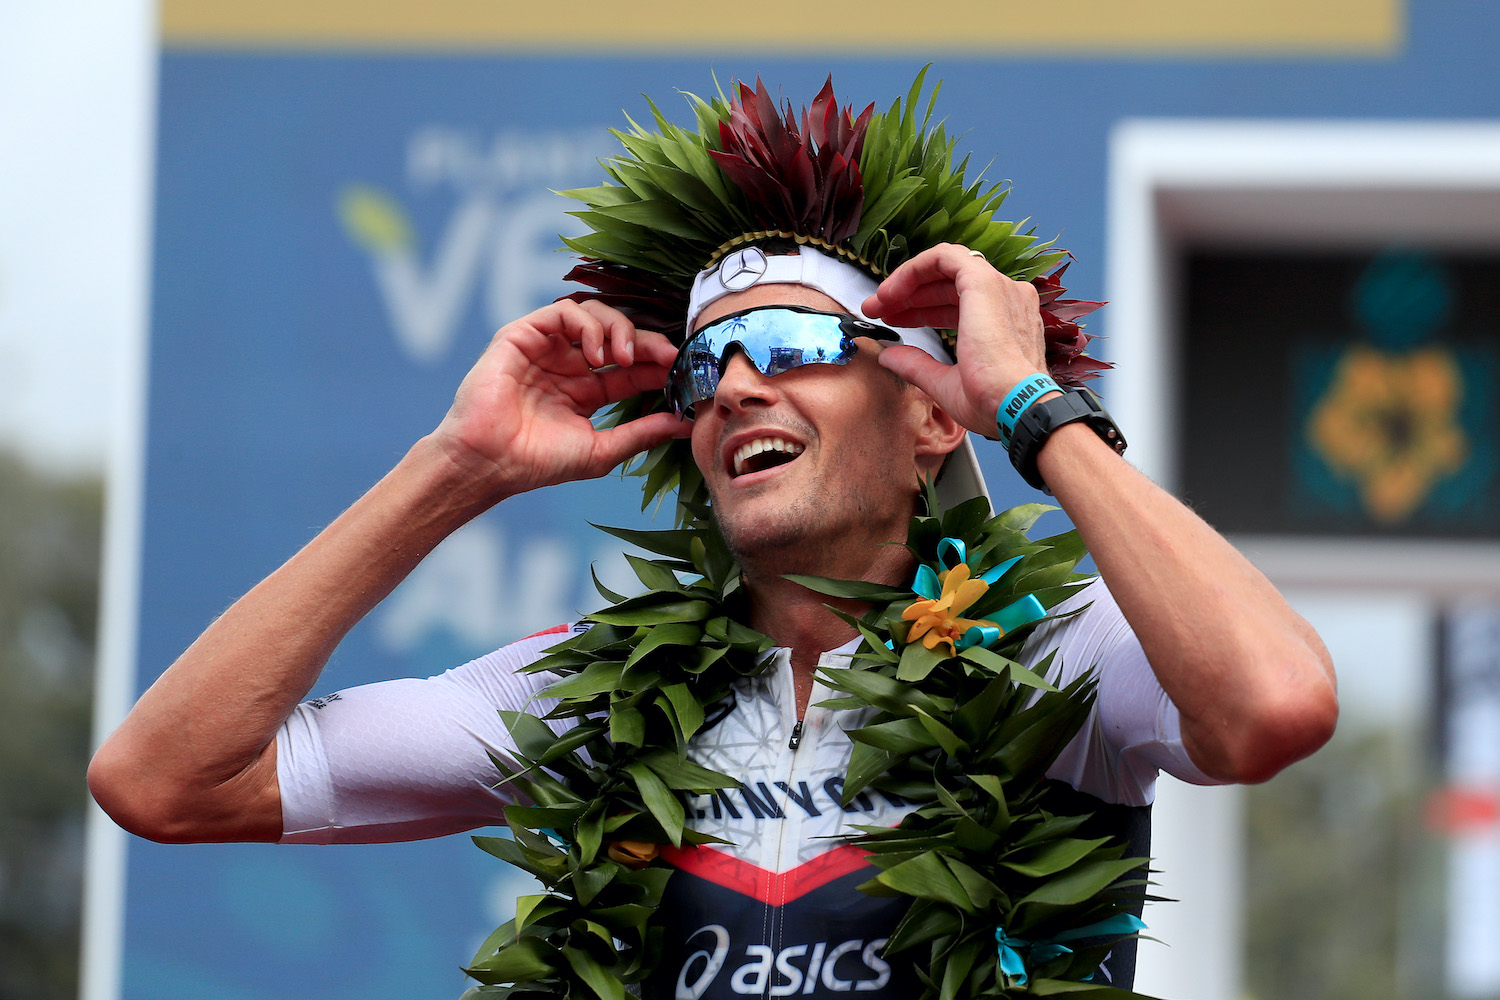 Jan Frodeno at the Ironman World Championship in 2019